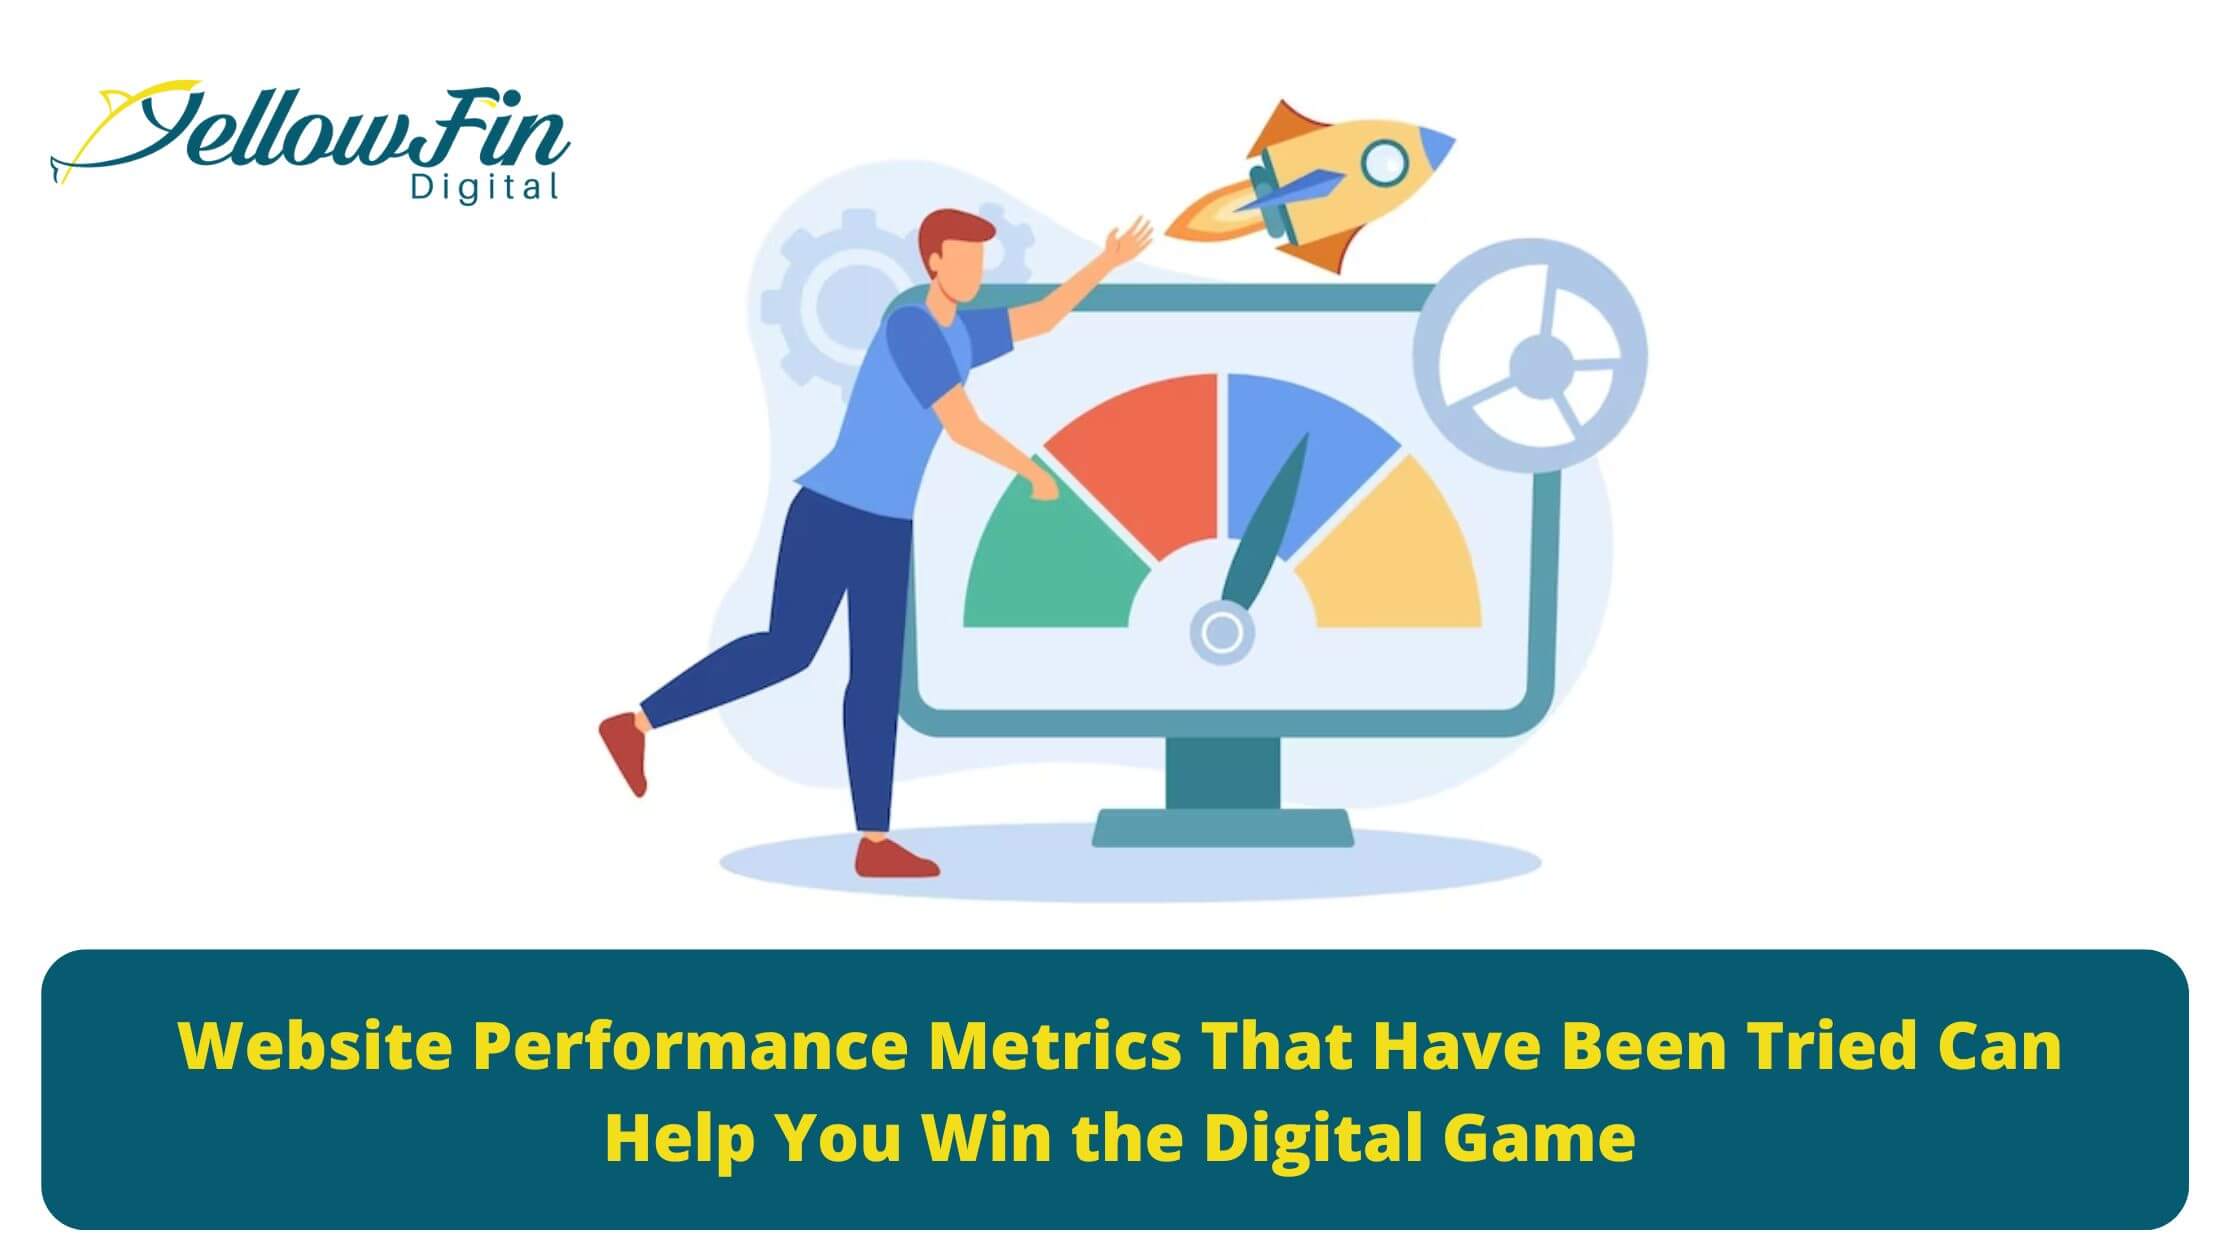 Website Performance Metrics That Have Been Tried Can Help You Win the Digital Game (1)